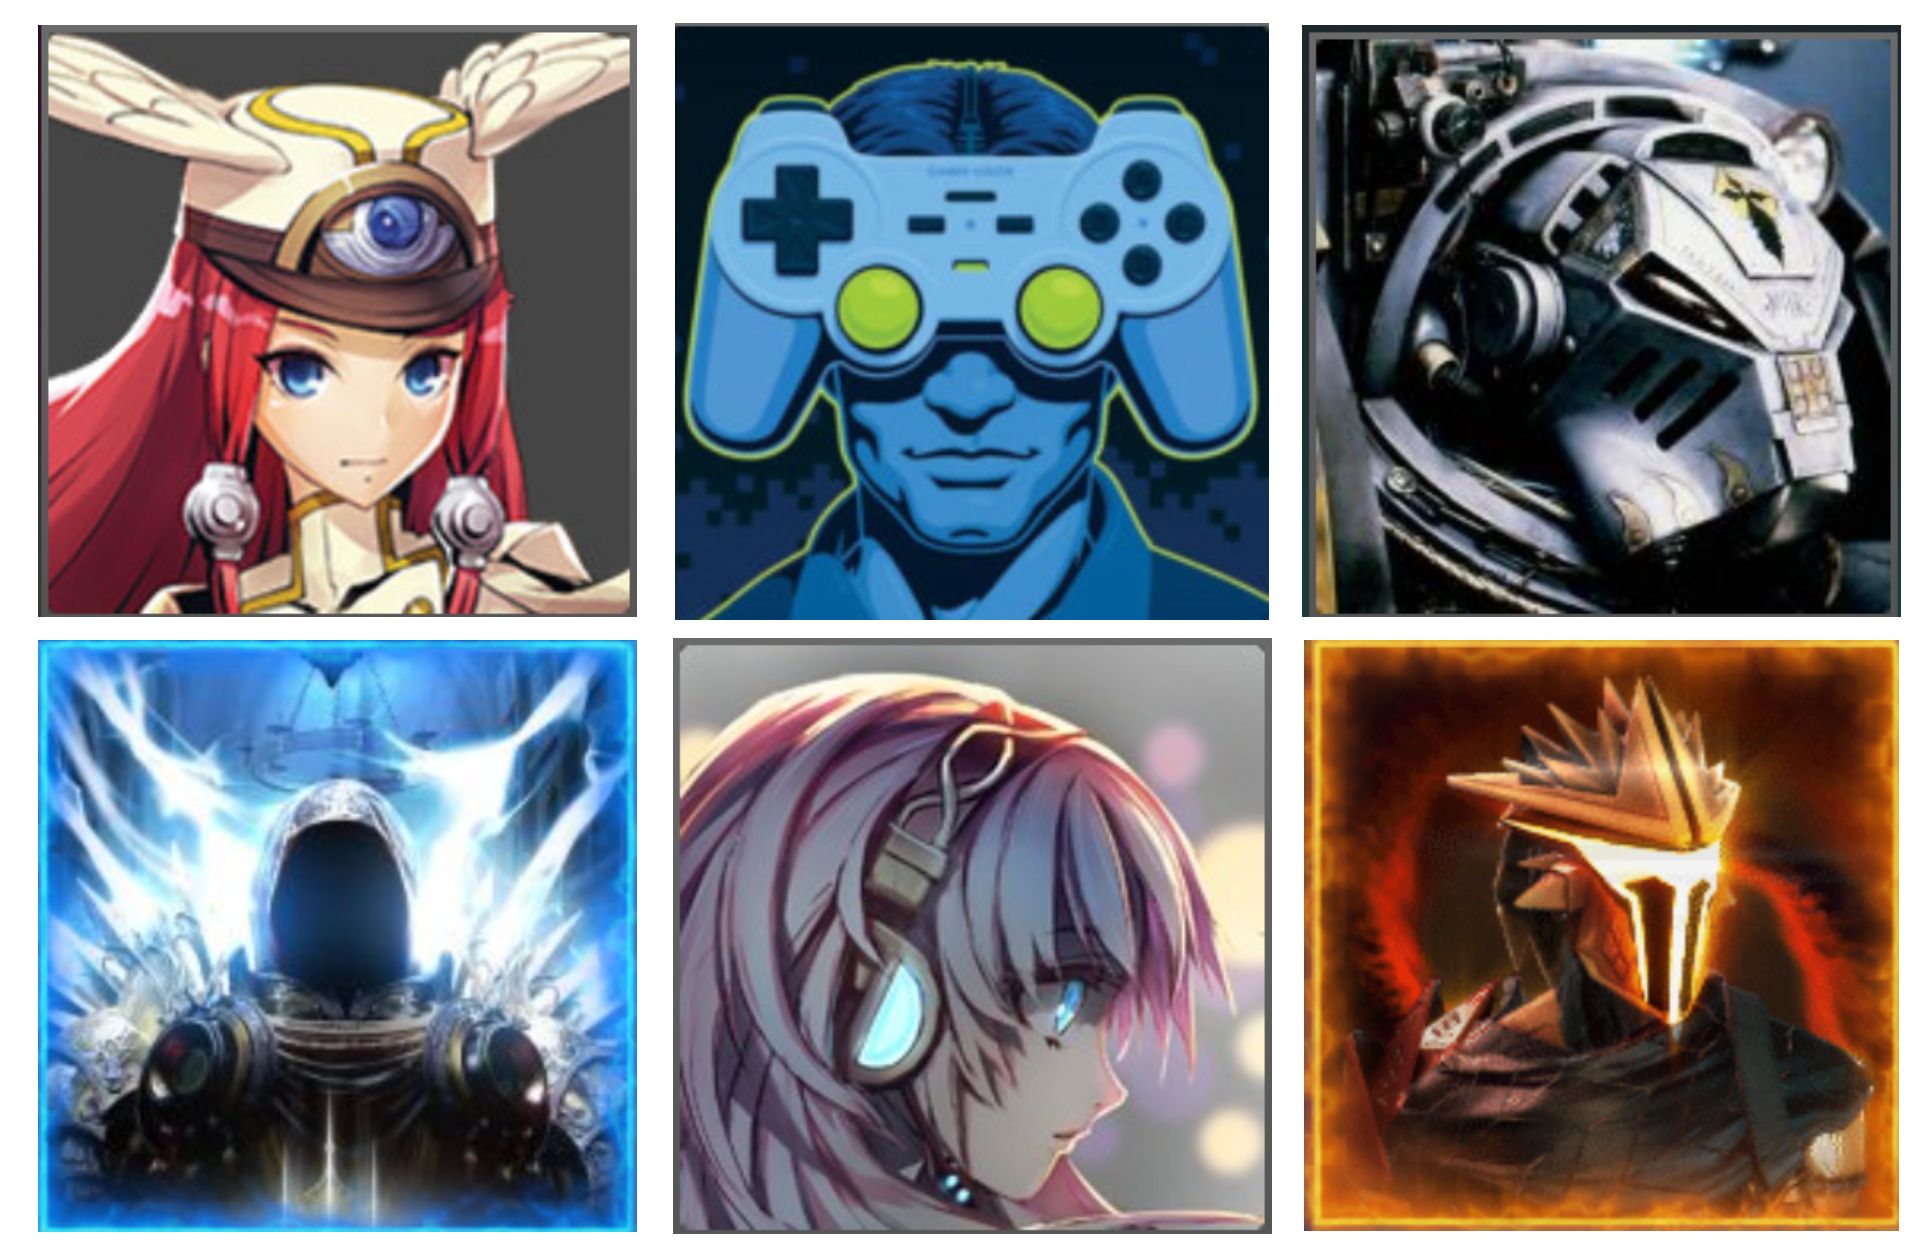 pictures collage with six different gaming avatars that are from Steam